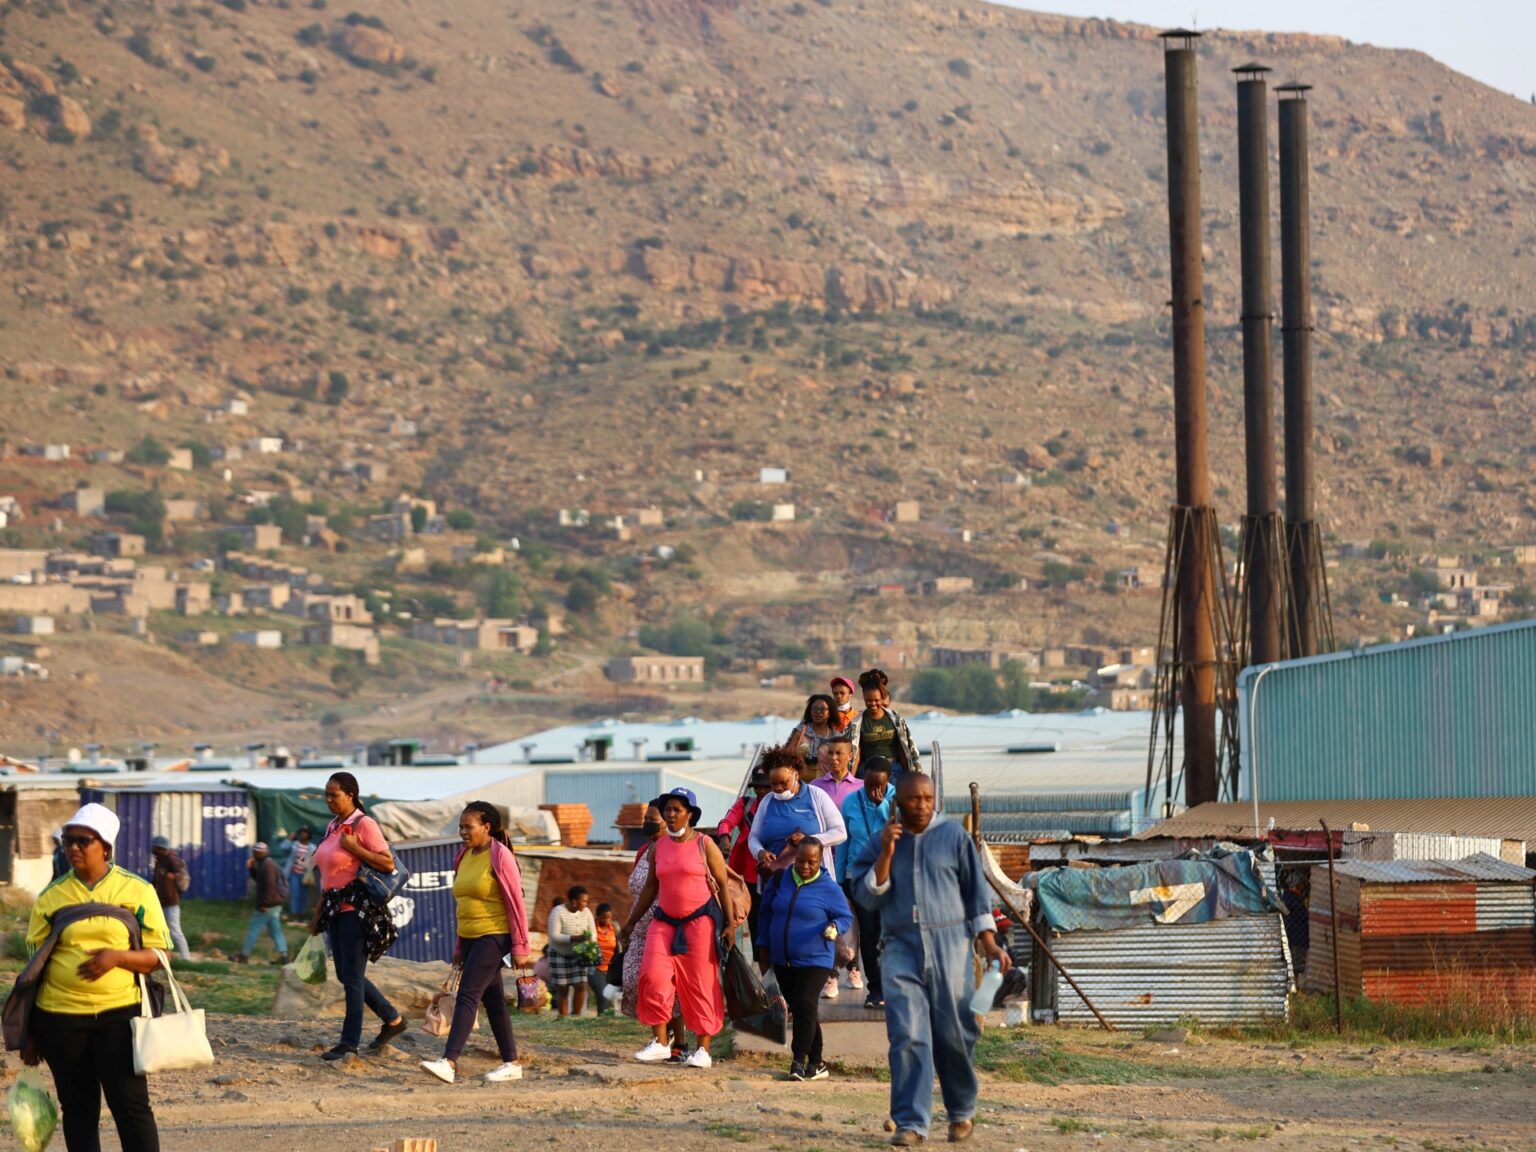 Curfew in Lesotho to tackle gun crime afterwards